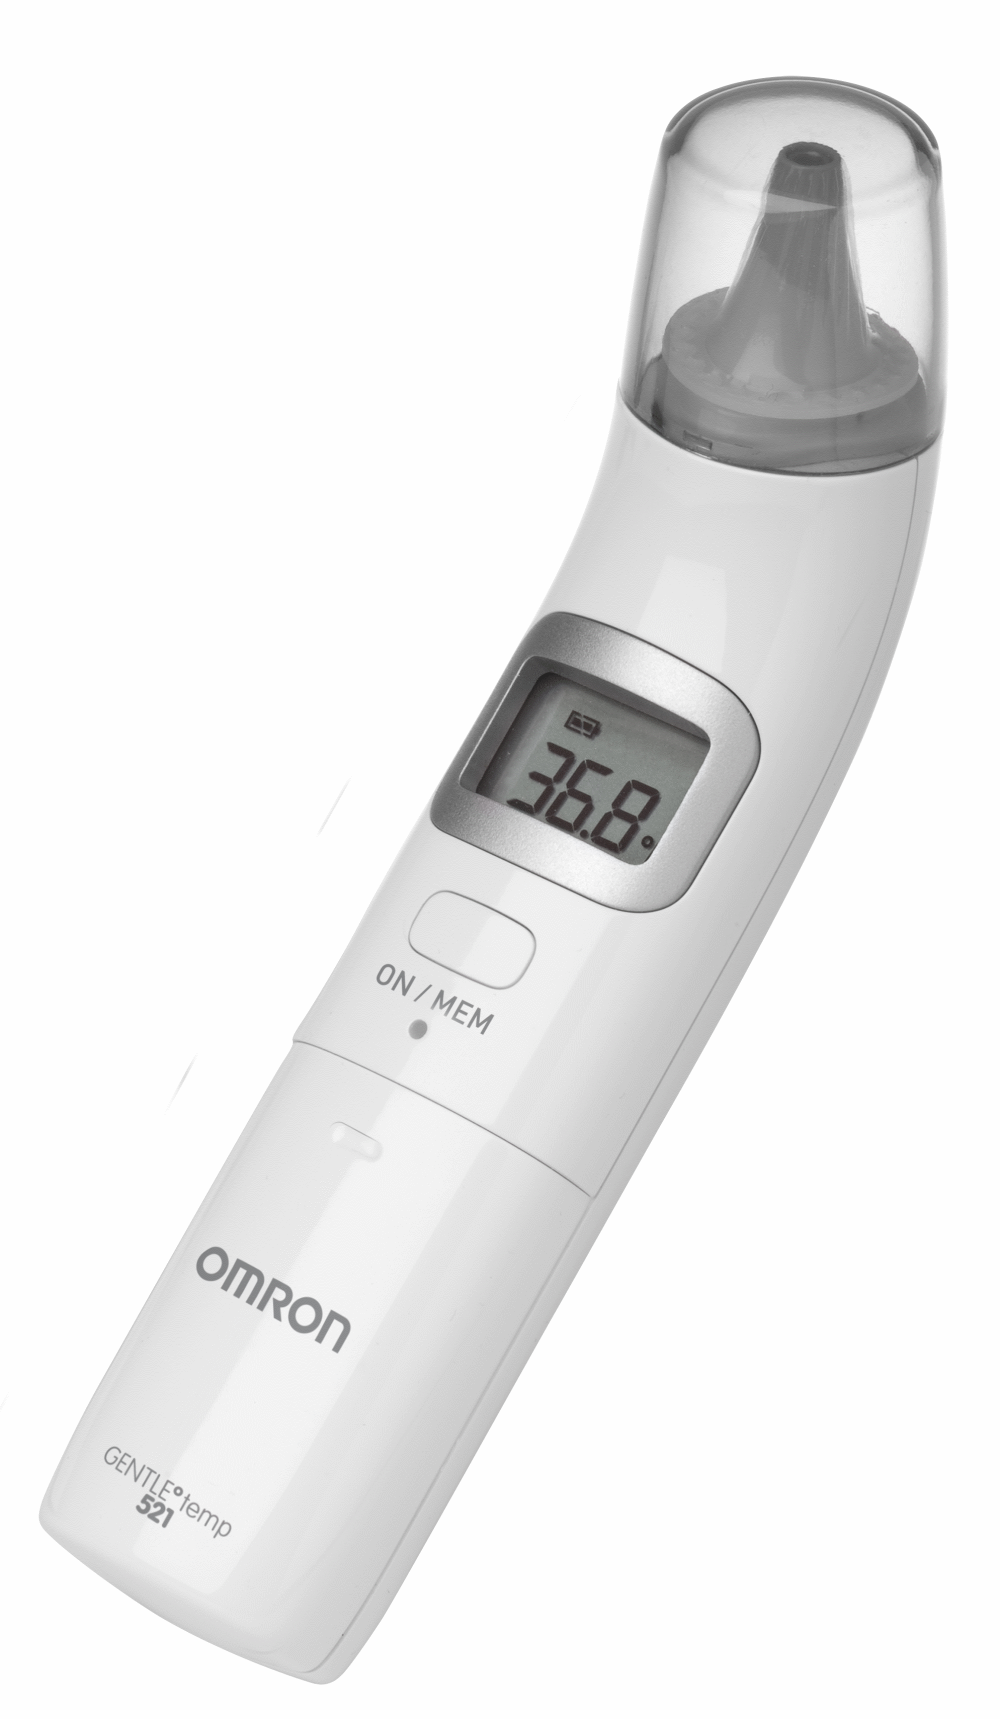 Thermomètre auriculaire Omron MC-521